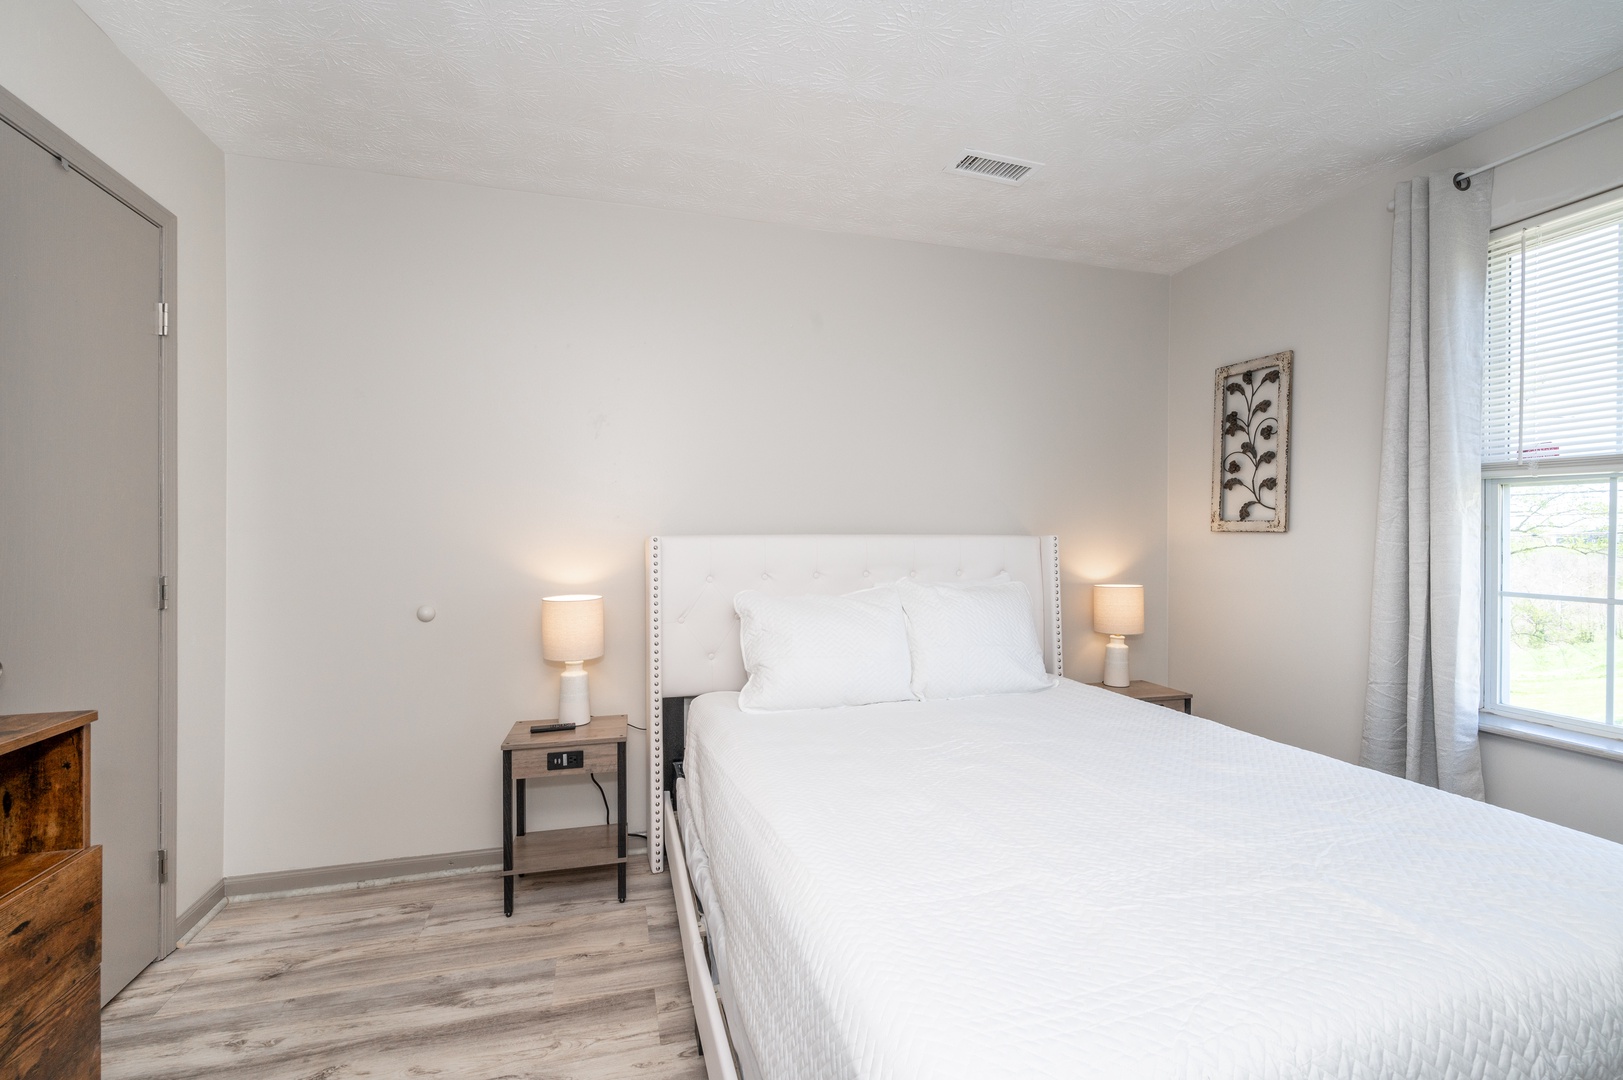 The first of two spacious bedrooms boasts a plush queen bed & Smart TV